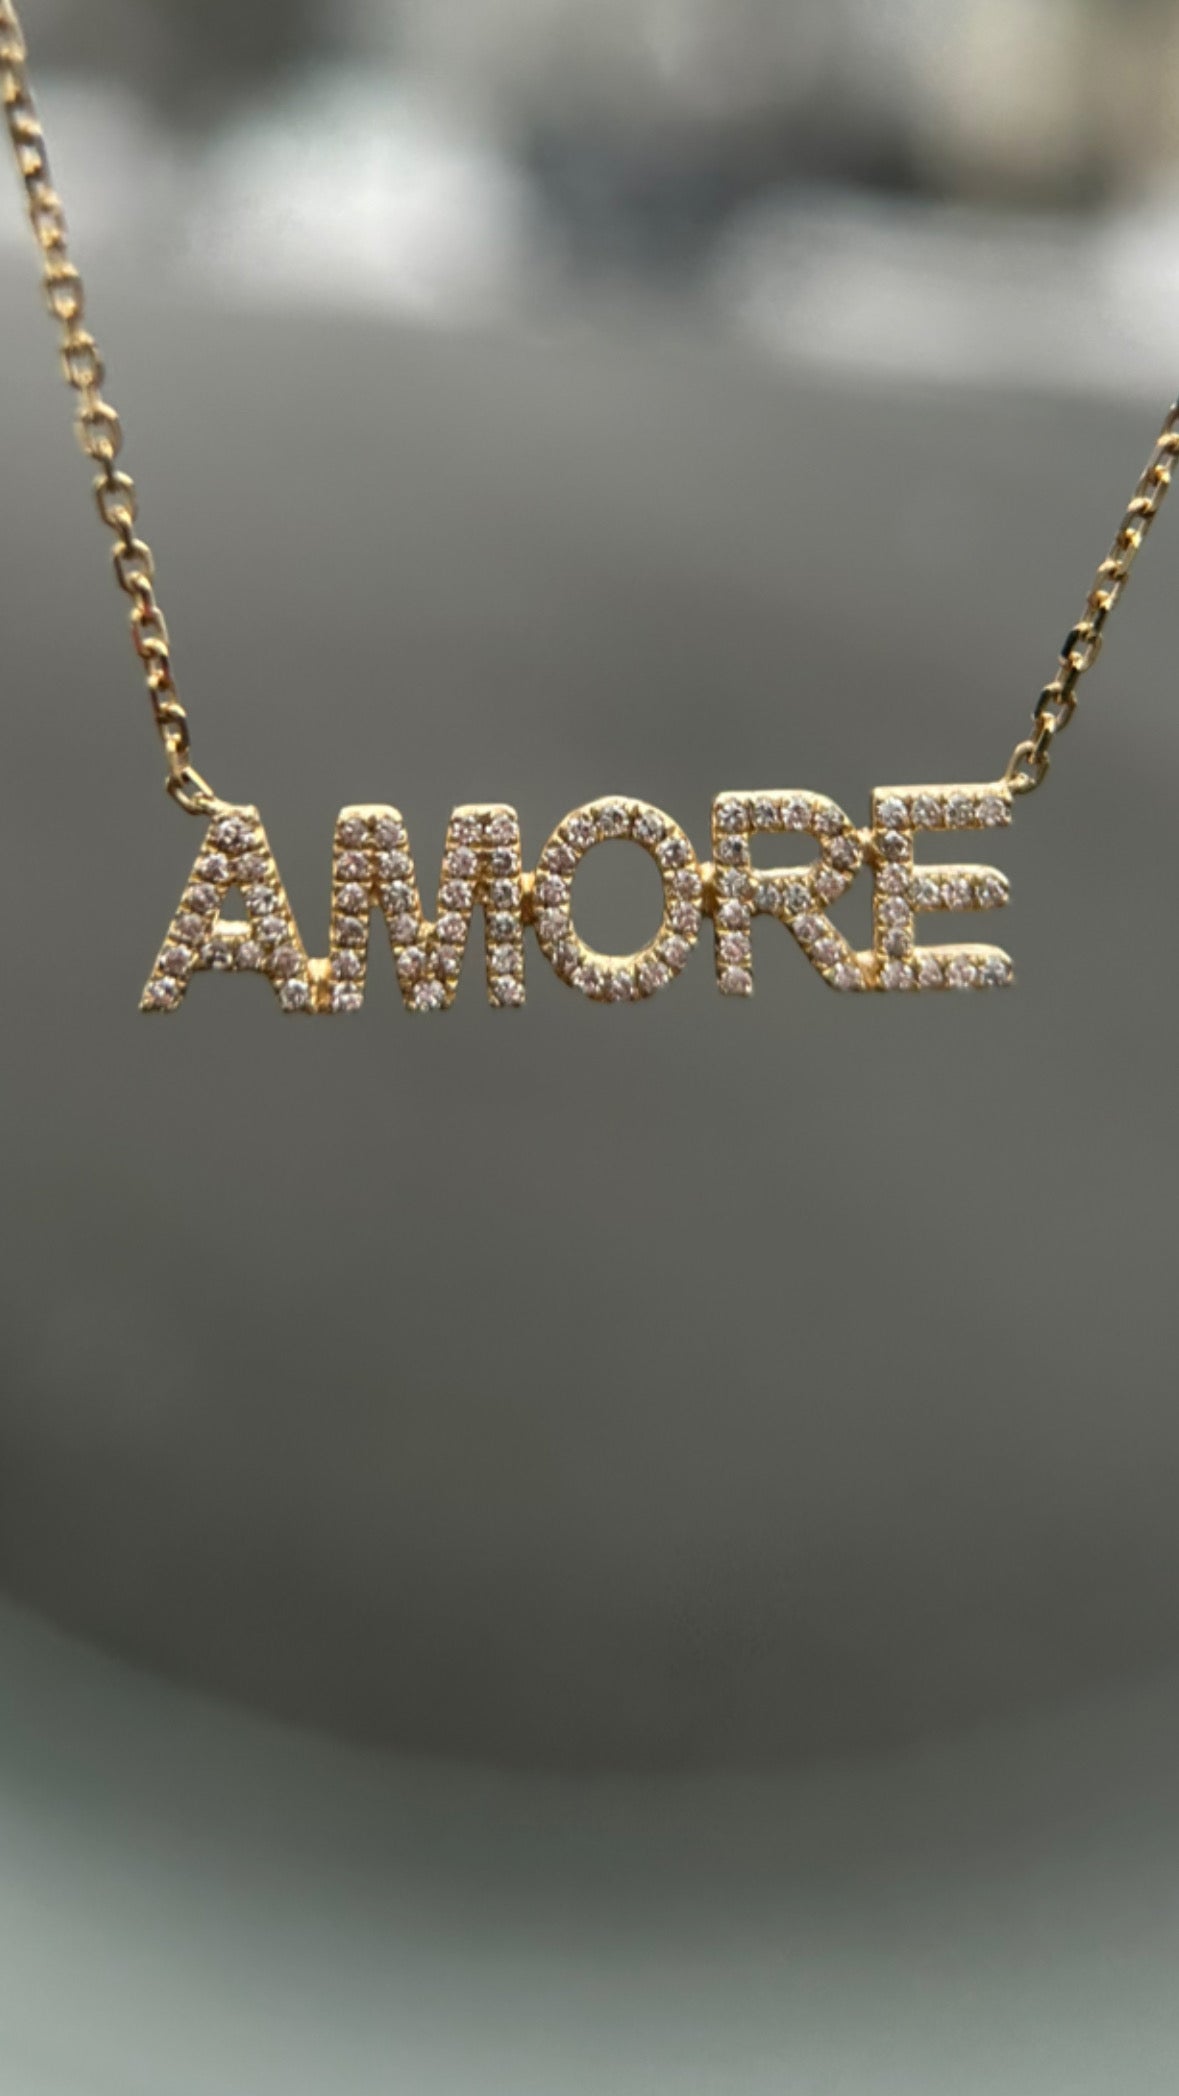 0.23ct ‘Amore’ Diamond Necklace in 14K Yellow Gold